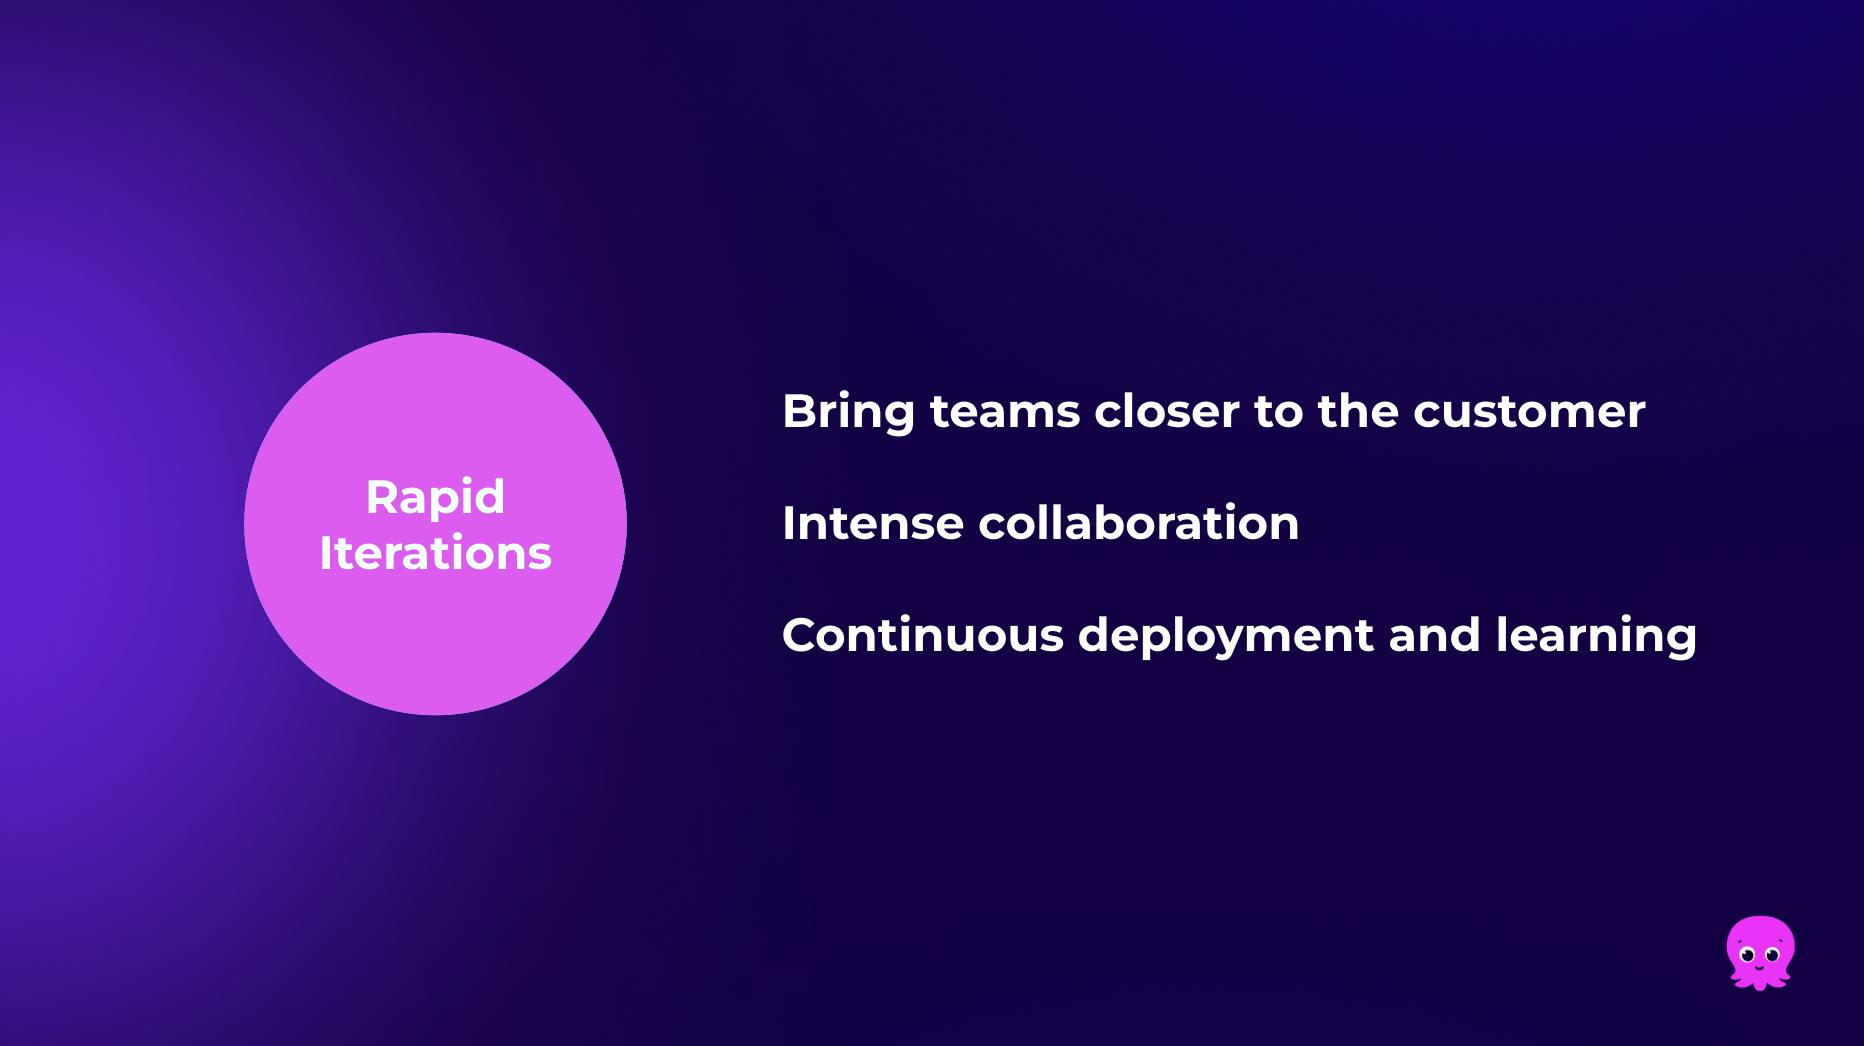 Rapid iterations: Bring teams closer to the customer, Intense collaboration, Continuous deployment and learning